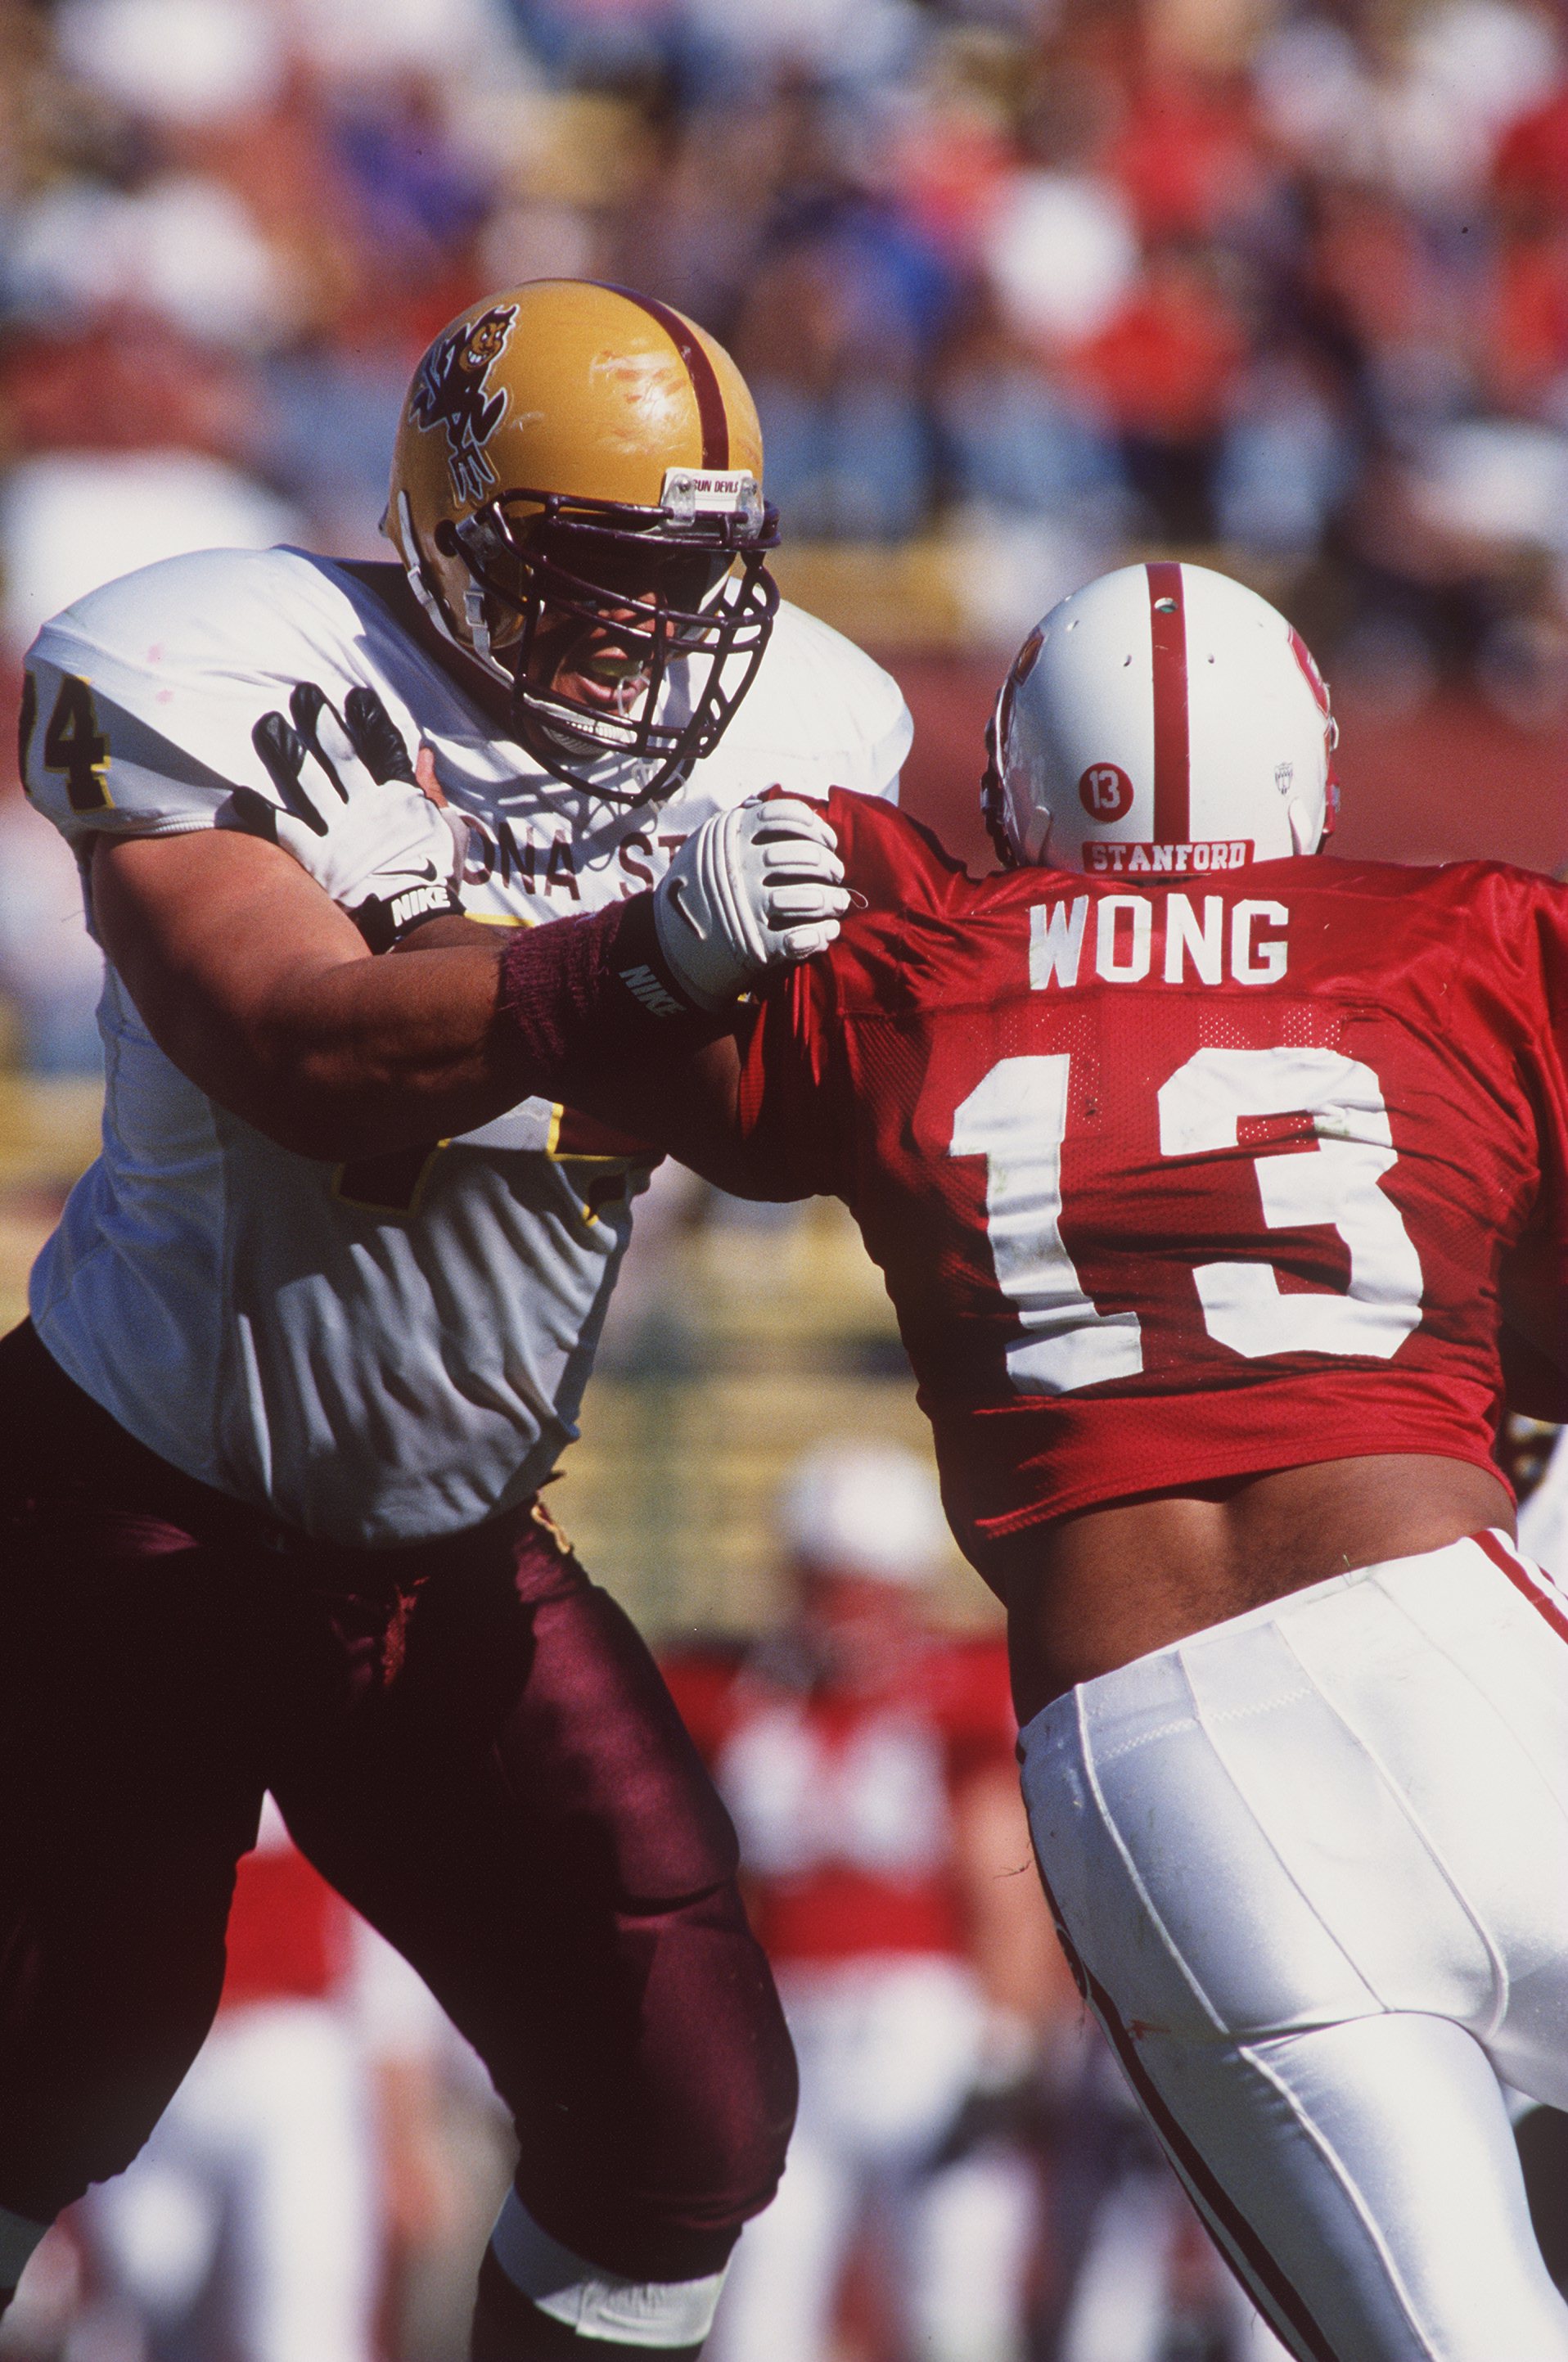 26 Oct 1996:  Offensive lineman Juan Roque of the Arizona State Sun Devils engages his opponent Kailee Wong #13 of the Stanford Cardinal during a pass play in the Sun Devils 41-9 victory over the Cardinal at Stanford Stadium in Palo Alto, California.